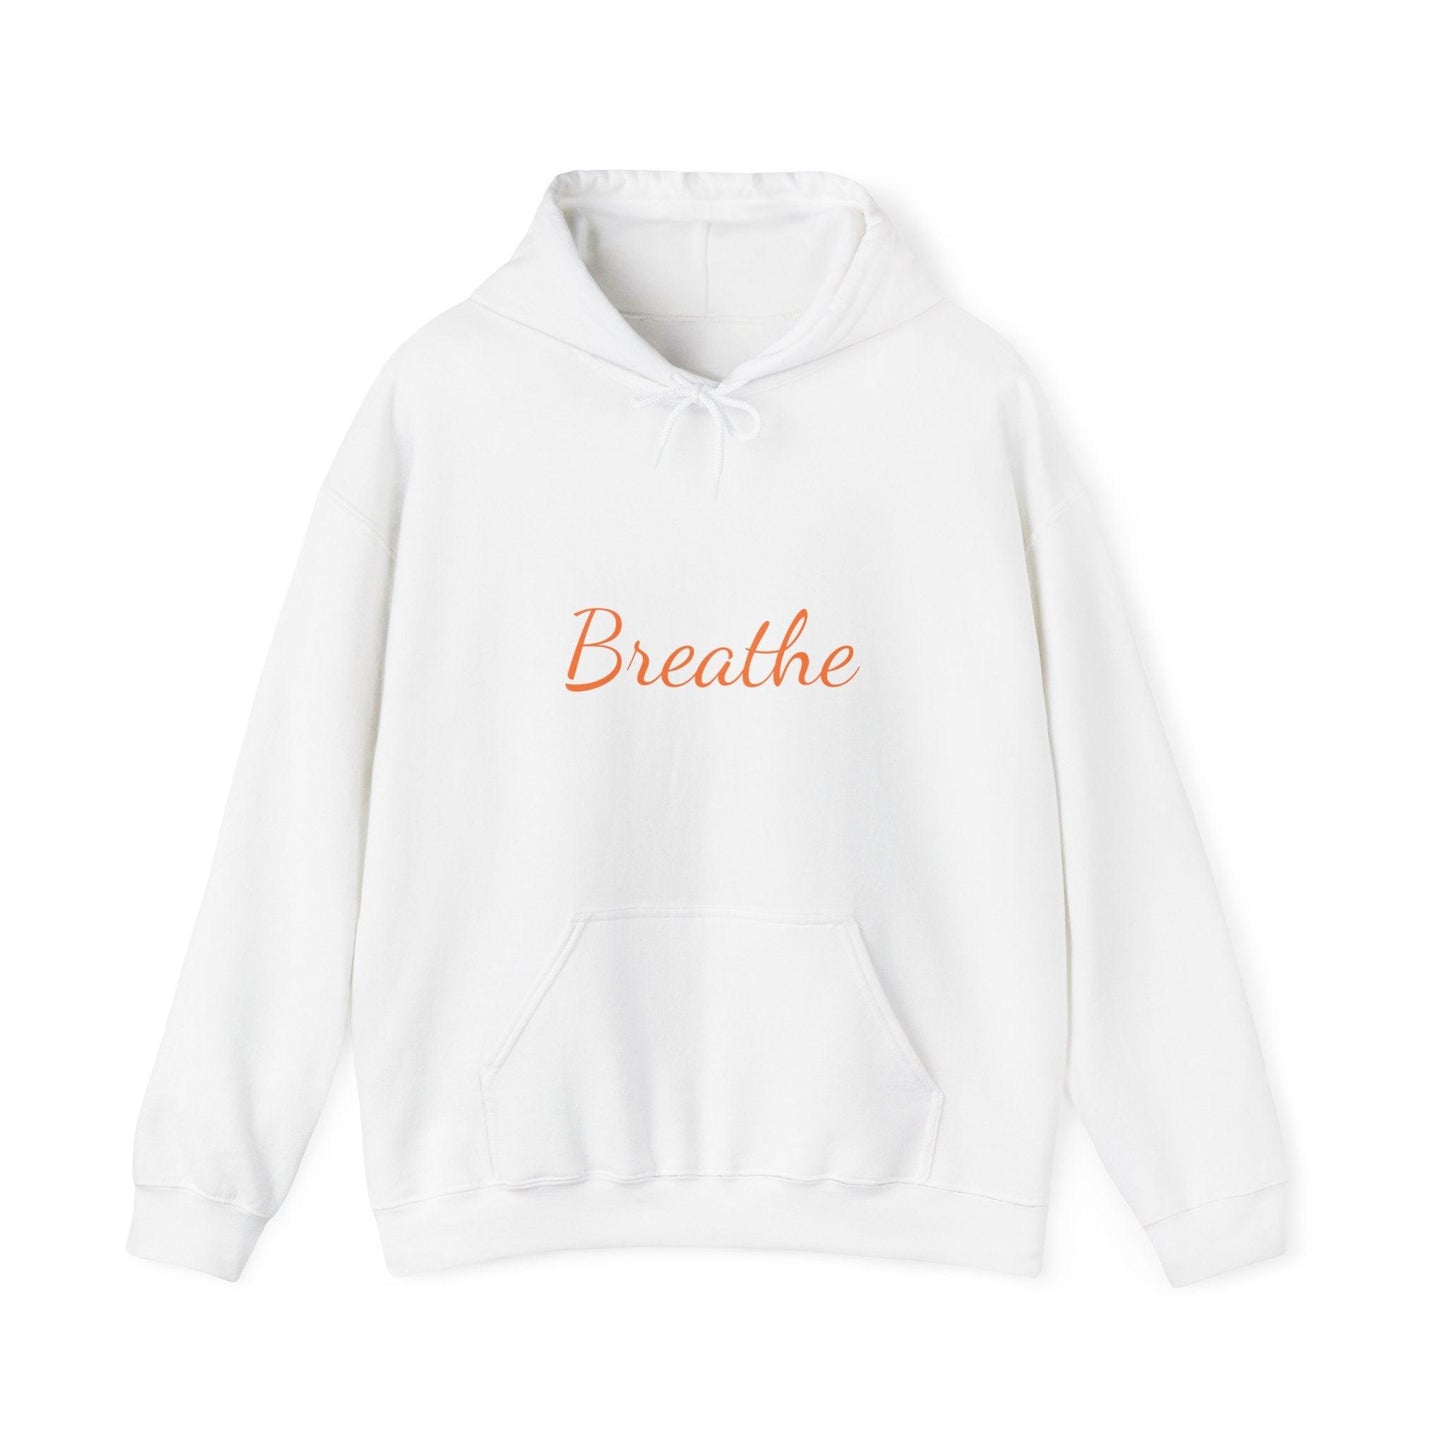 White Unisex with Orange Breathe Logo Hoodie - Perfect for Travel, Meditation, Mindfulness and daily wear.